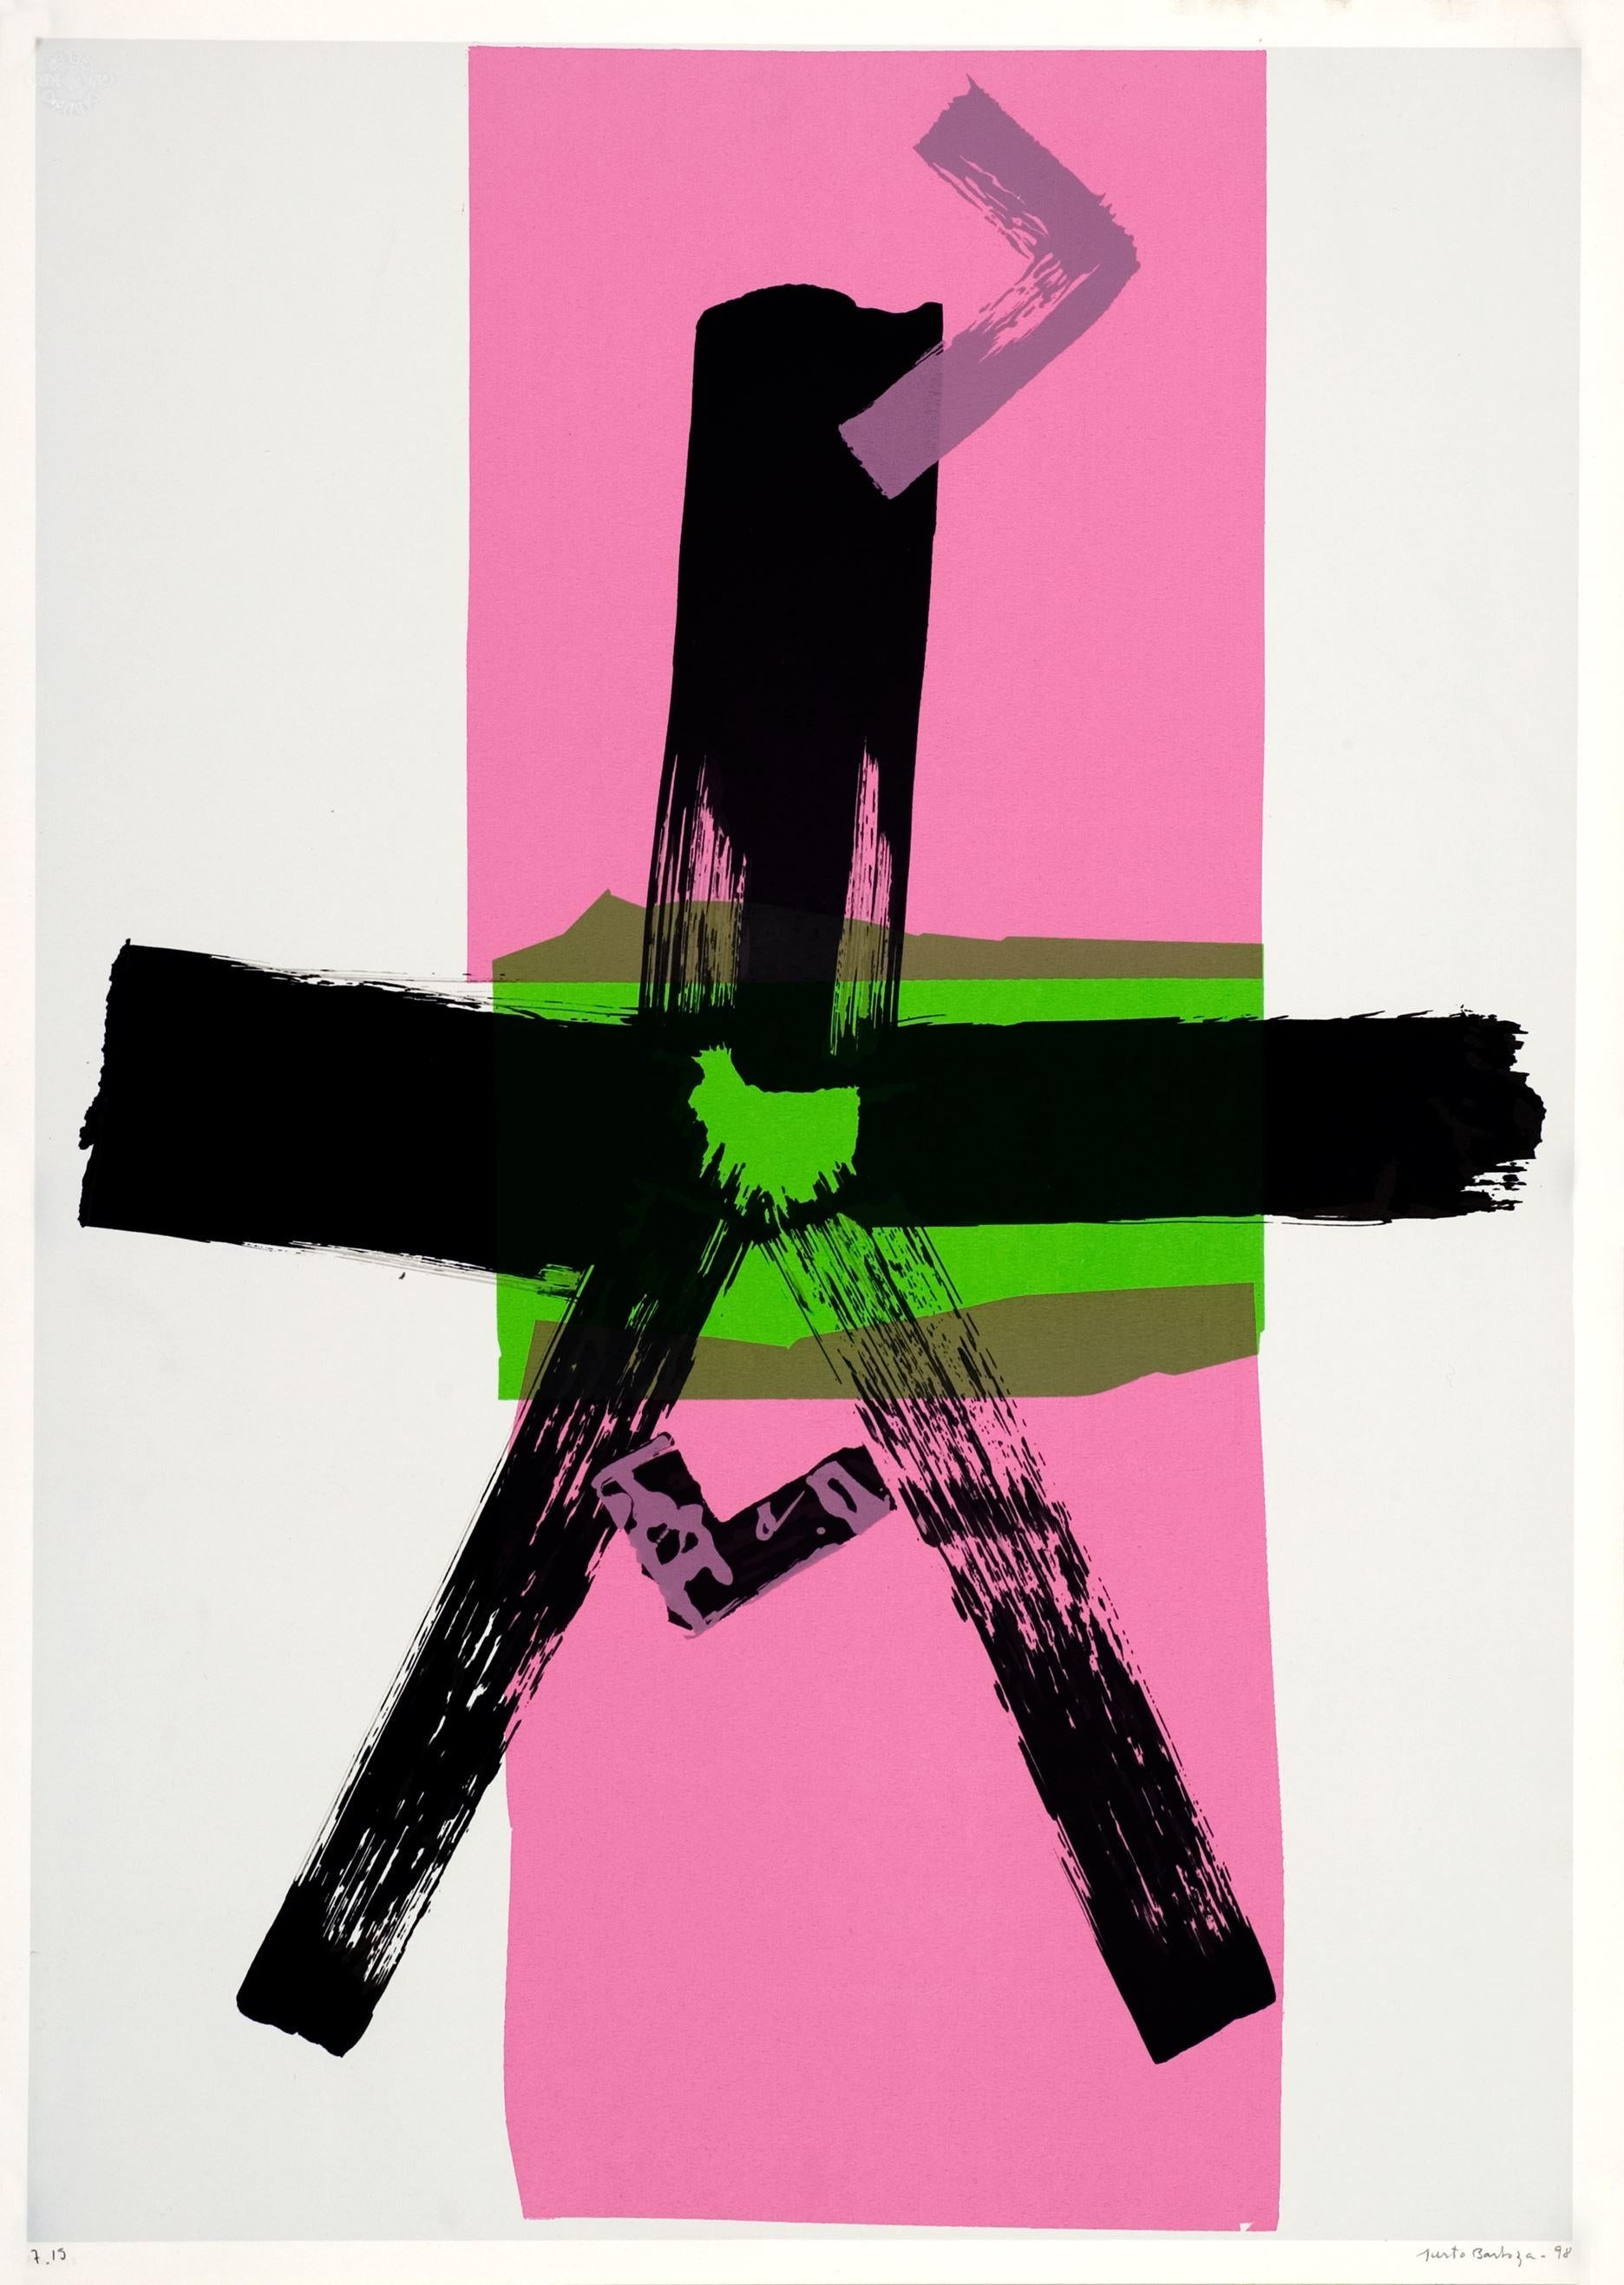 Justo Barboza (Argentina, 1938)
'Sin título (verde rosa)', 1998
silkscreen on paper Guarro Geler
27.6 x 19.7 in. (70 x 50 cm.)
Edition of 15
Unframed
ID: BAR1437-020-015
Hand-signed by author